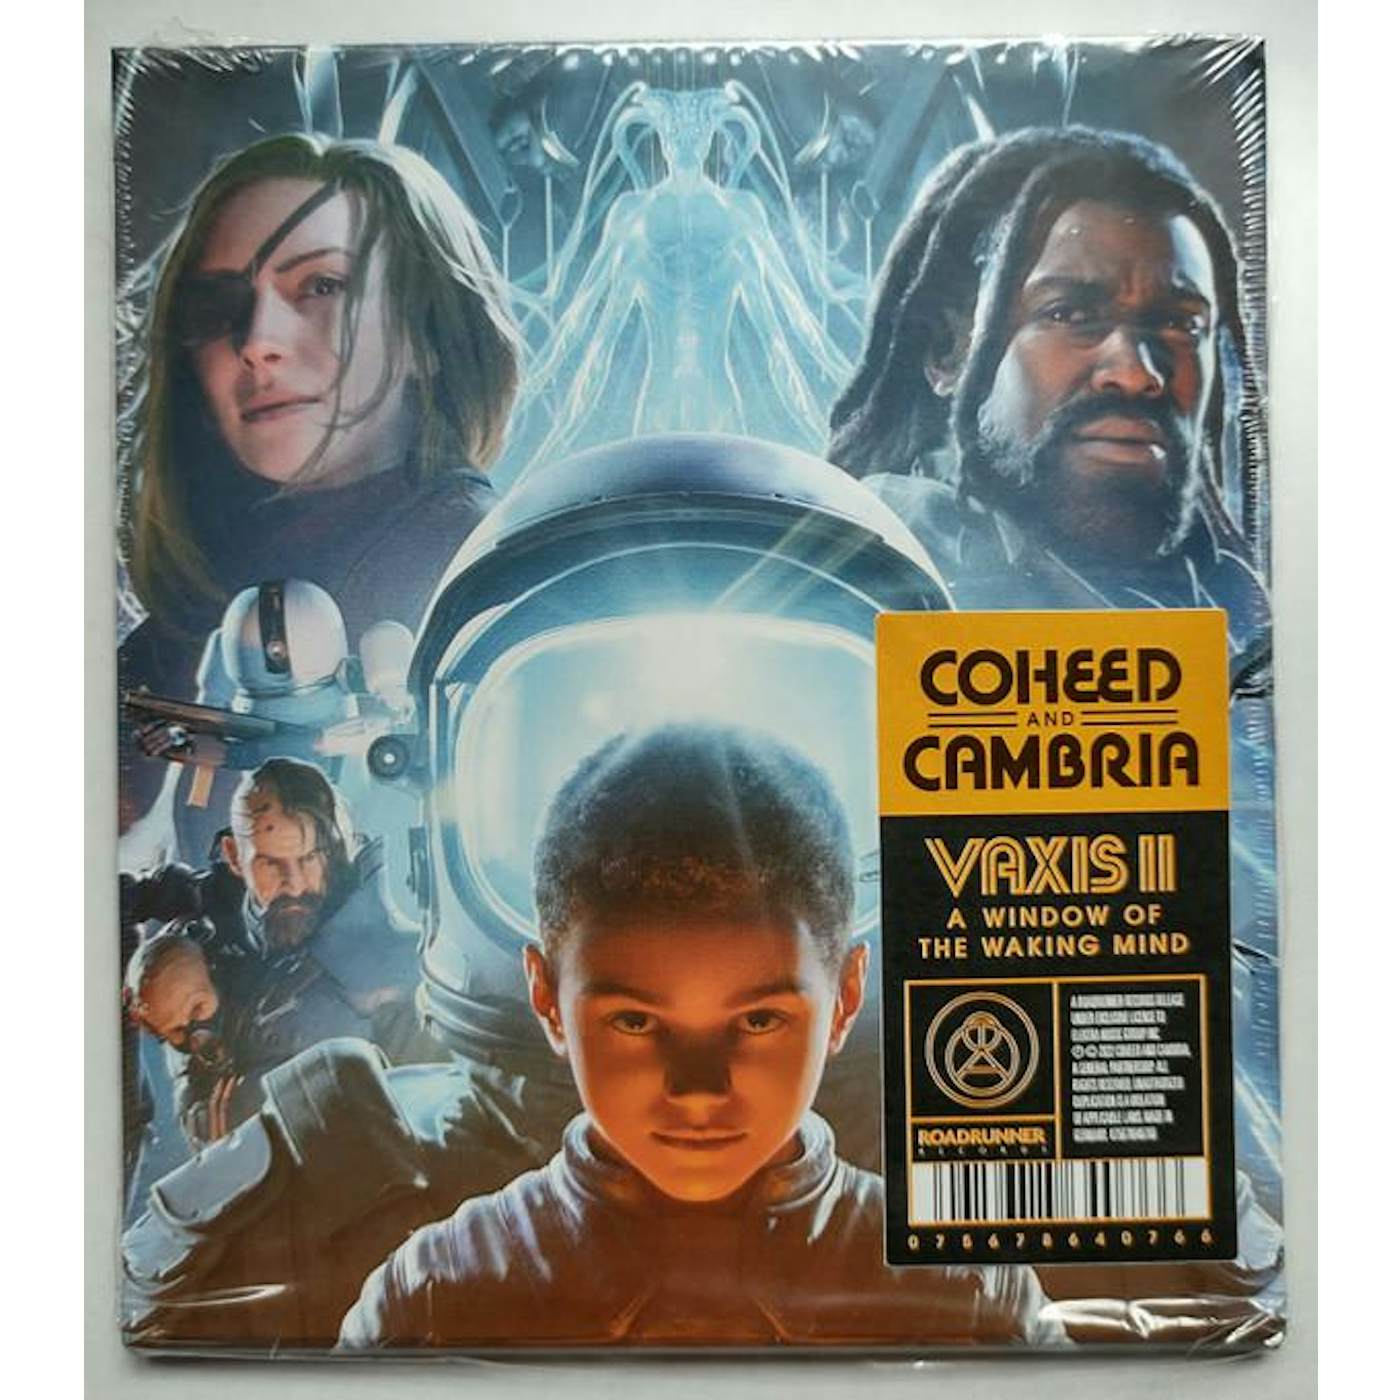 Coheed and Cambria VAXIS II: A WINDOW OF THE WAKING MIND CD